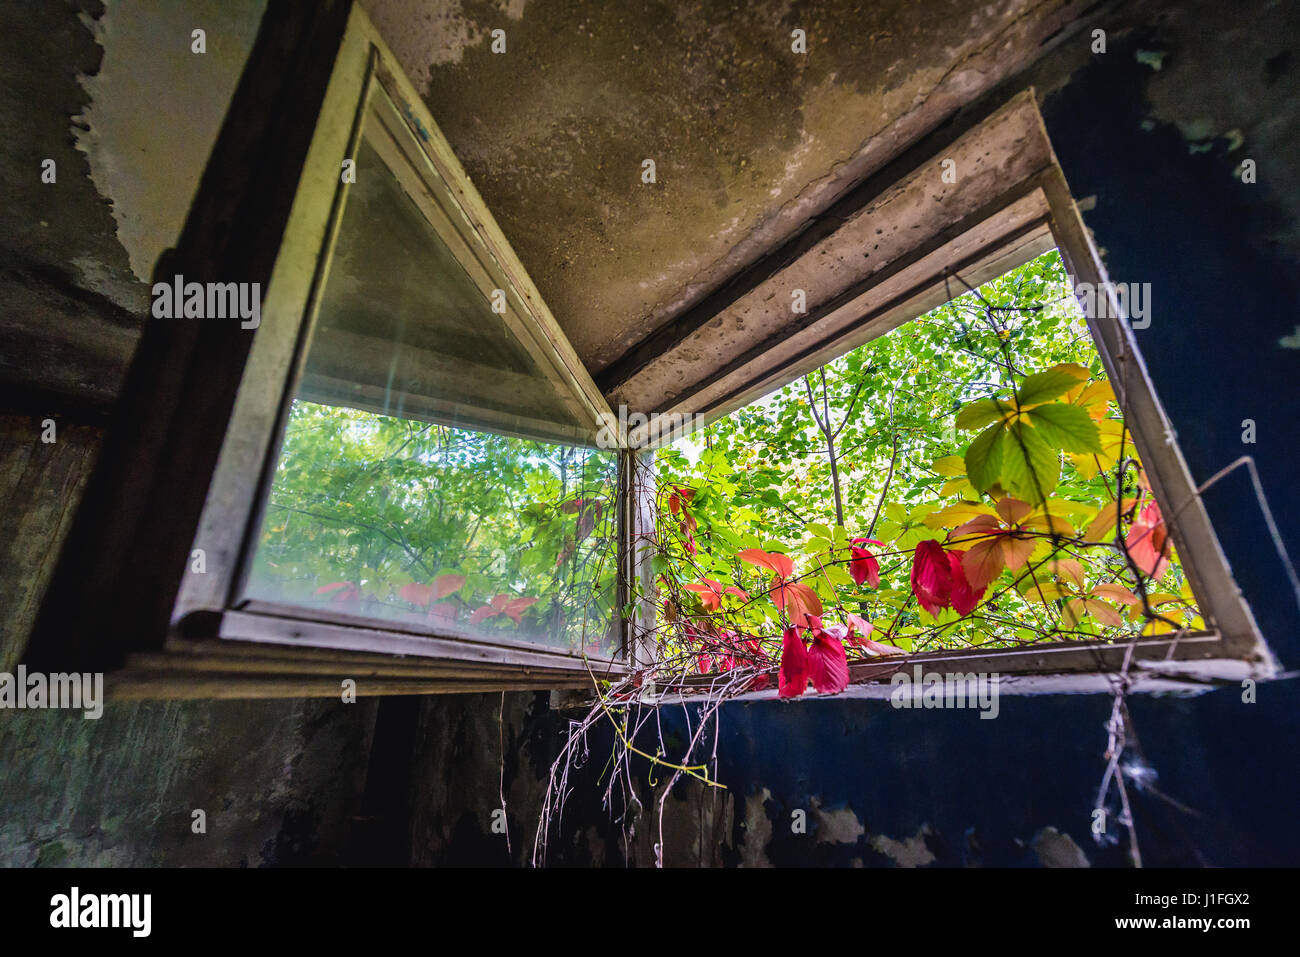 Inside the abandoned block of flats in Chernobyl-2 military base, Chernobyl Nuclear Power Plant Zone of Alienation in Ukraine Stock Photo